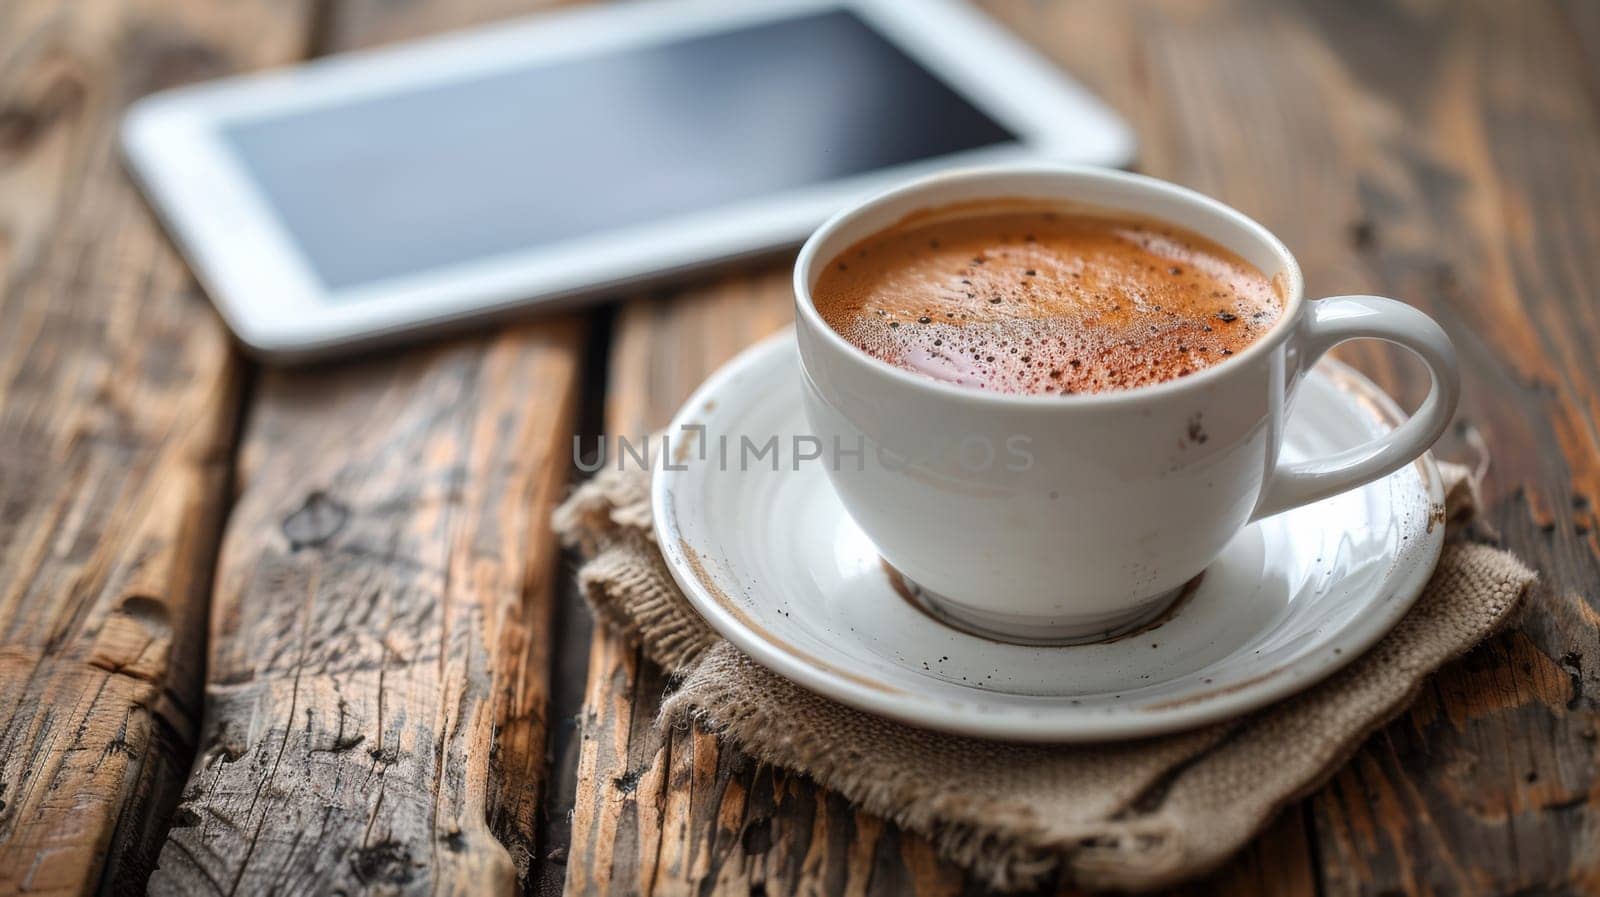 A cup of coffee on a saucer next to an ipad